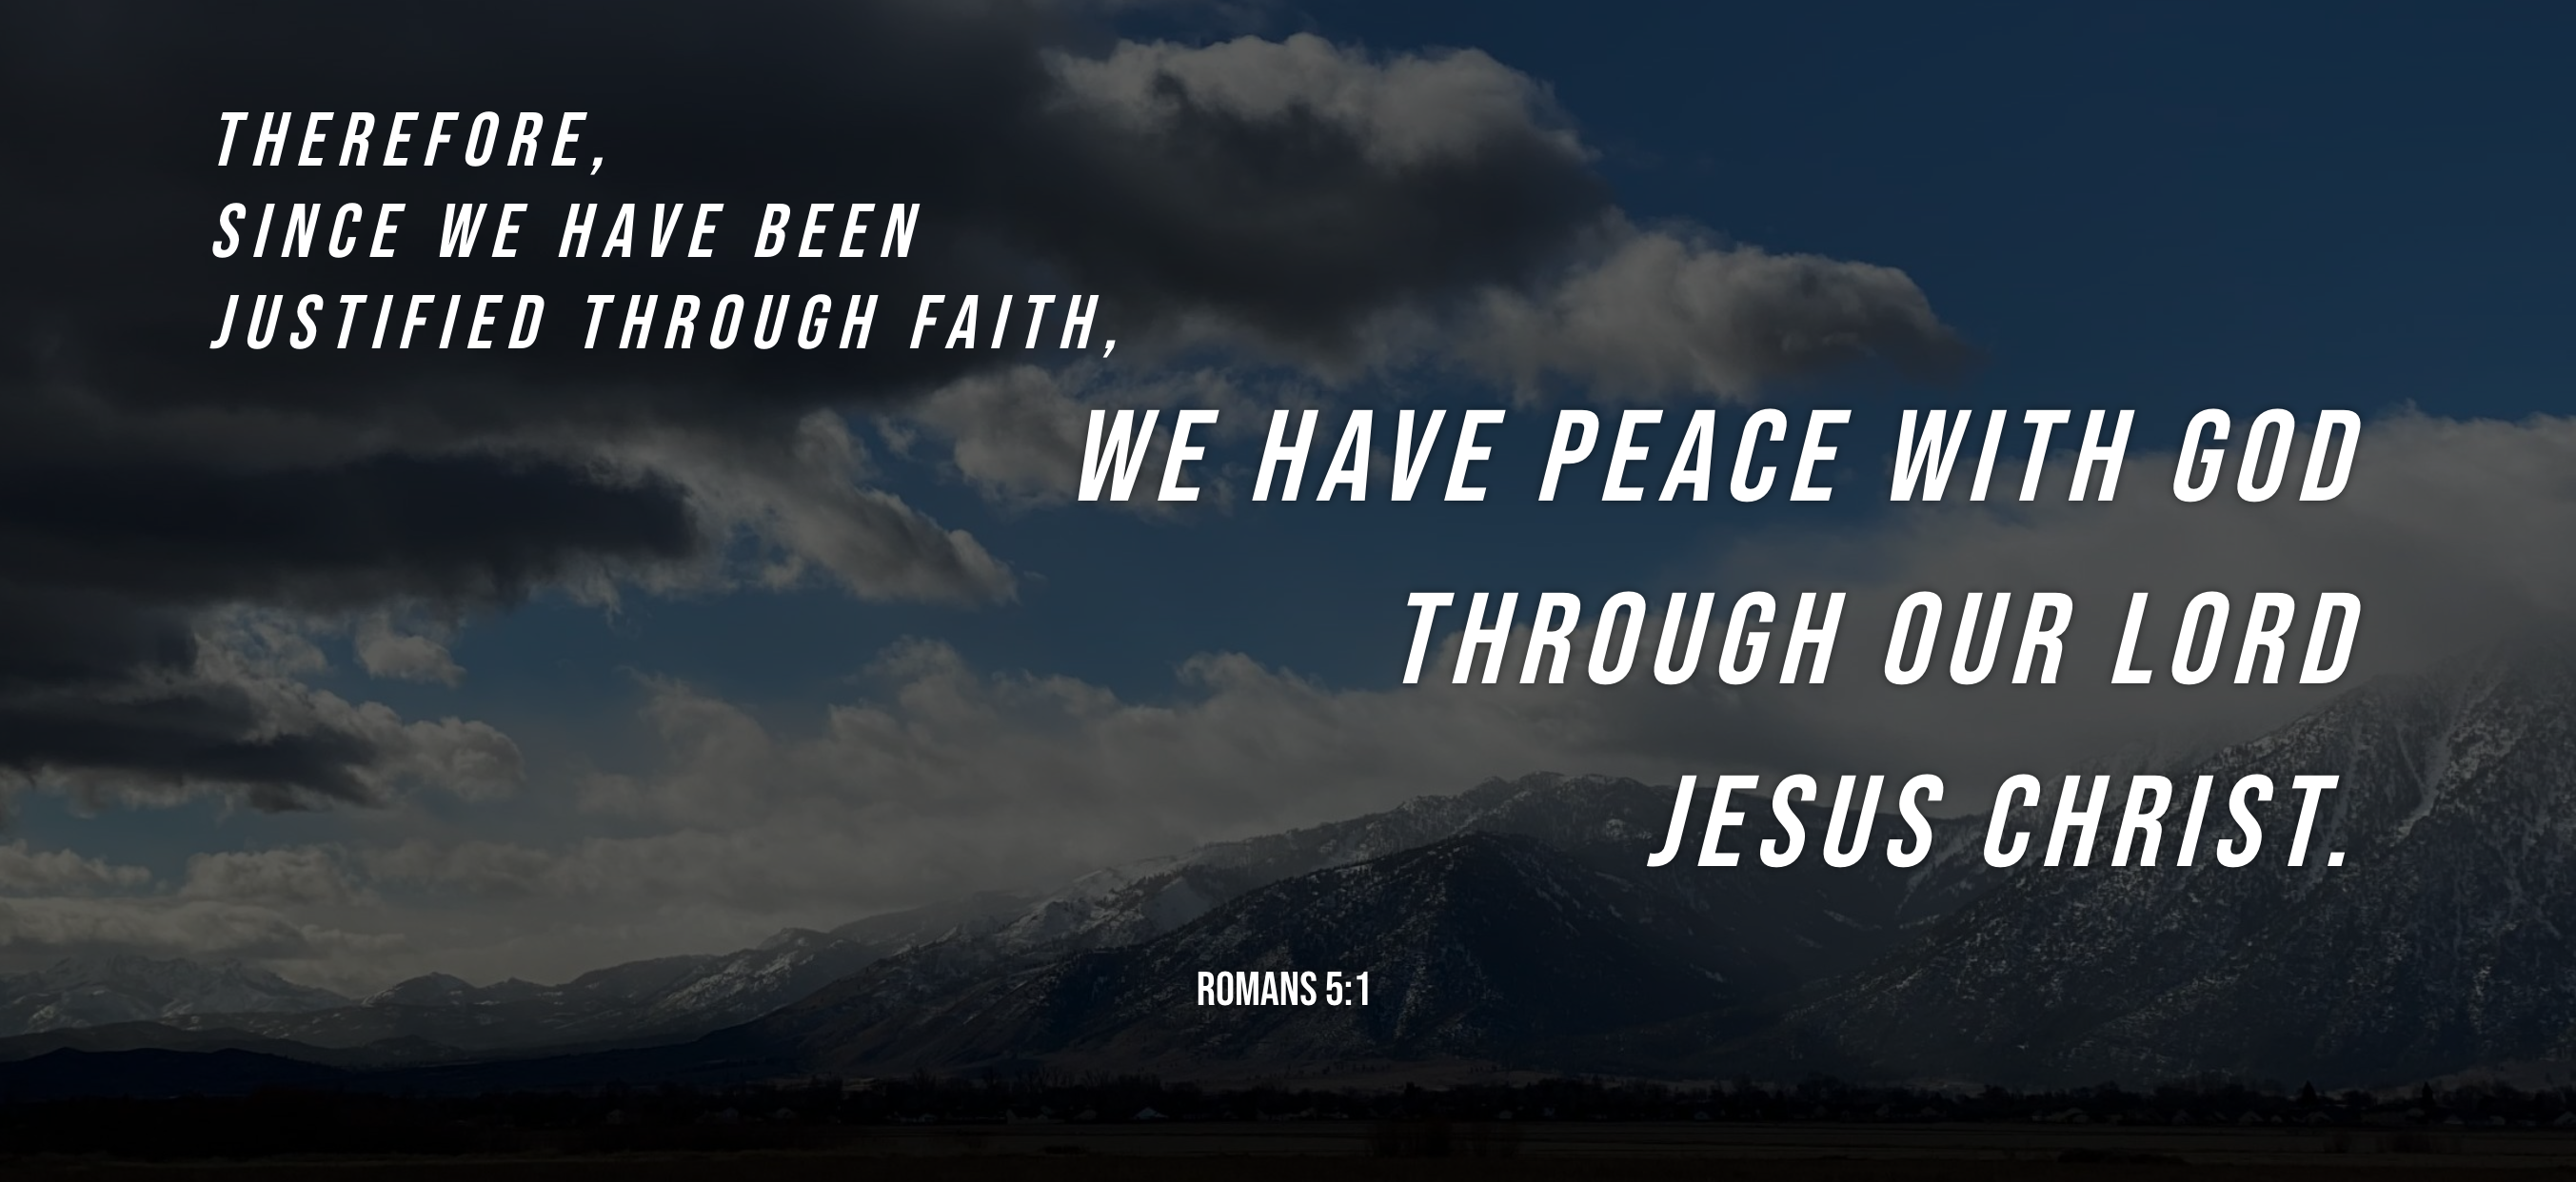 have peace with God through our Lord Jesus Christ. (Romans 5:1)